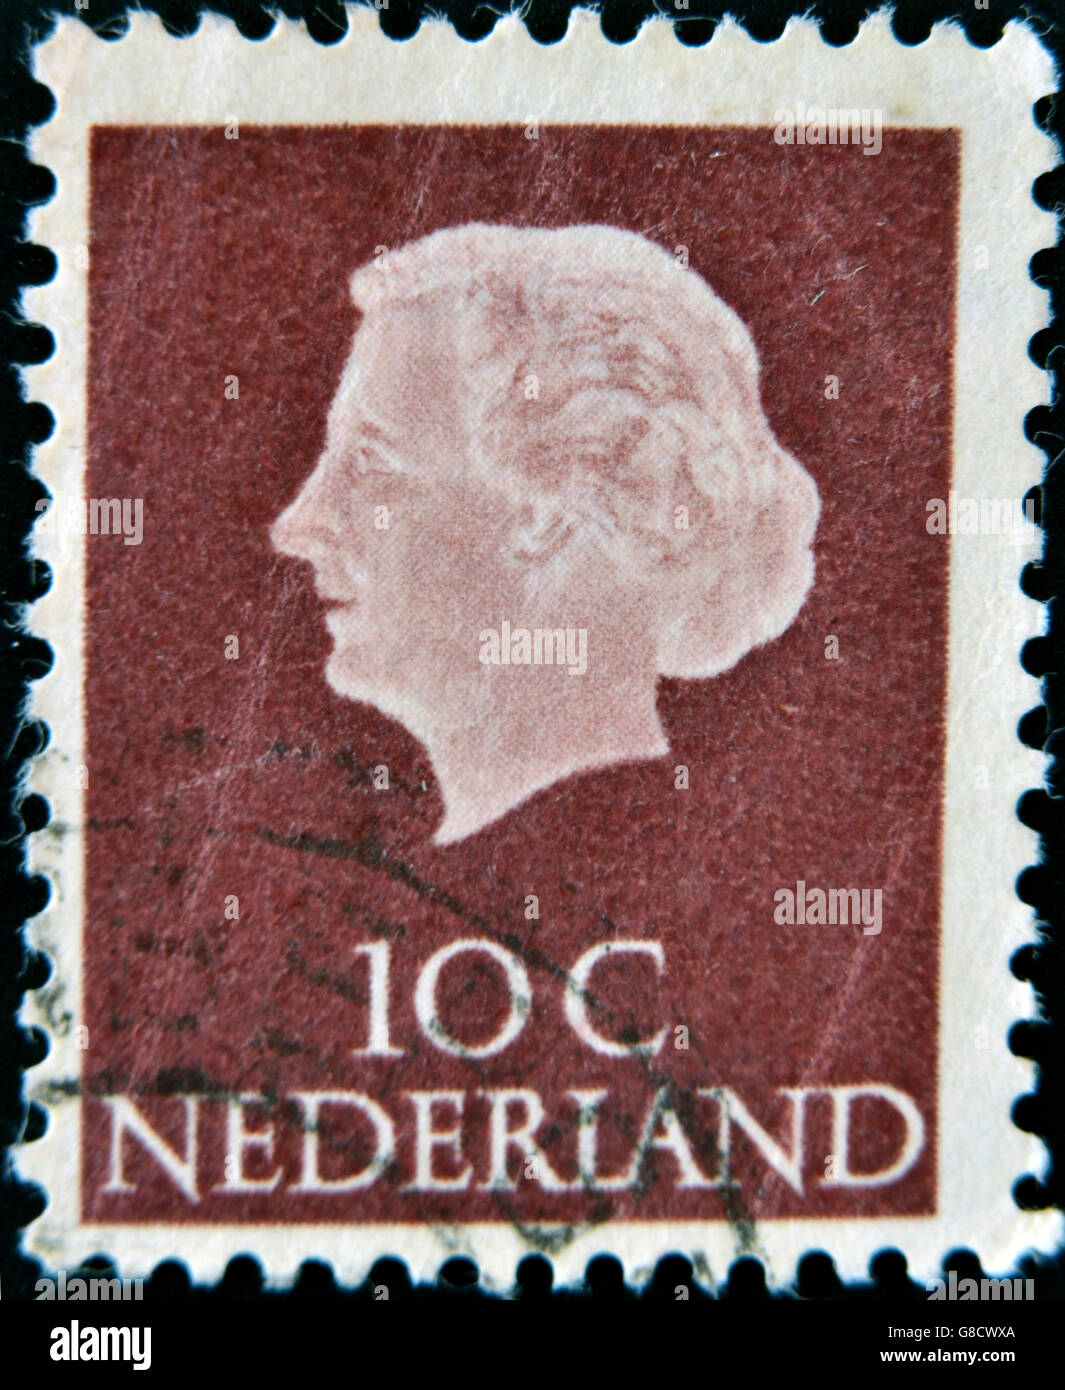 HOLLAND - CIRCA 1964: A stamp printed in the Netherlands shows image of Queen Juliana, circa 1964 Stock Photo